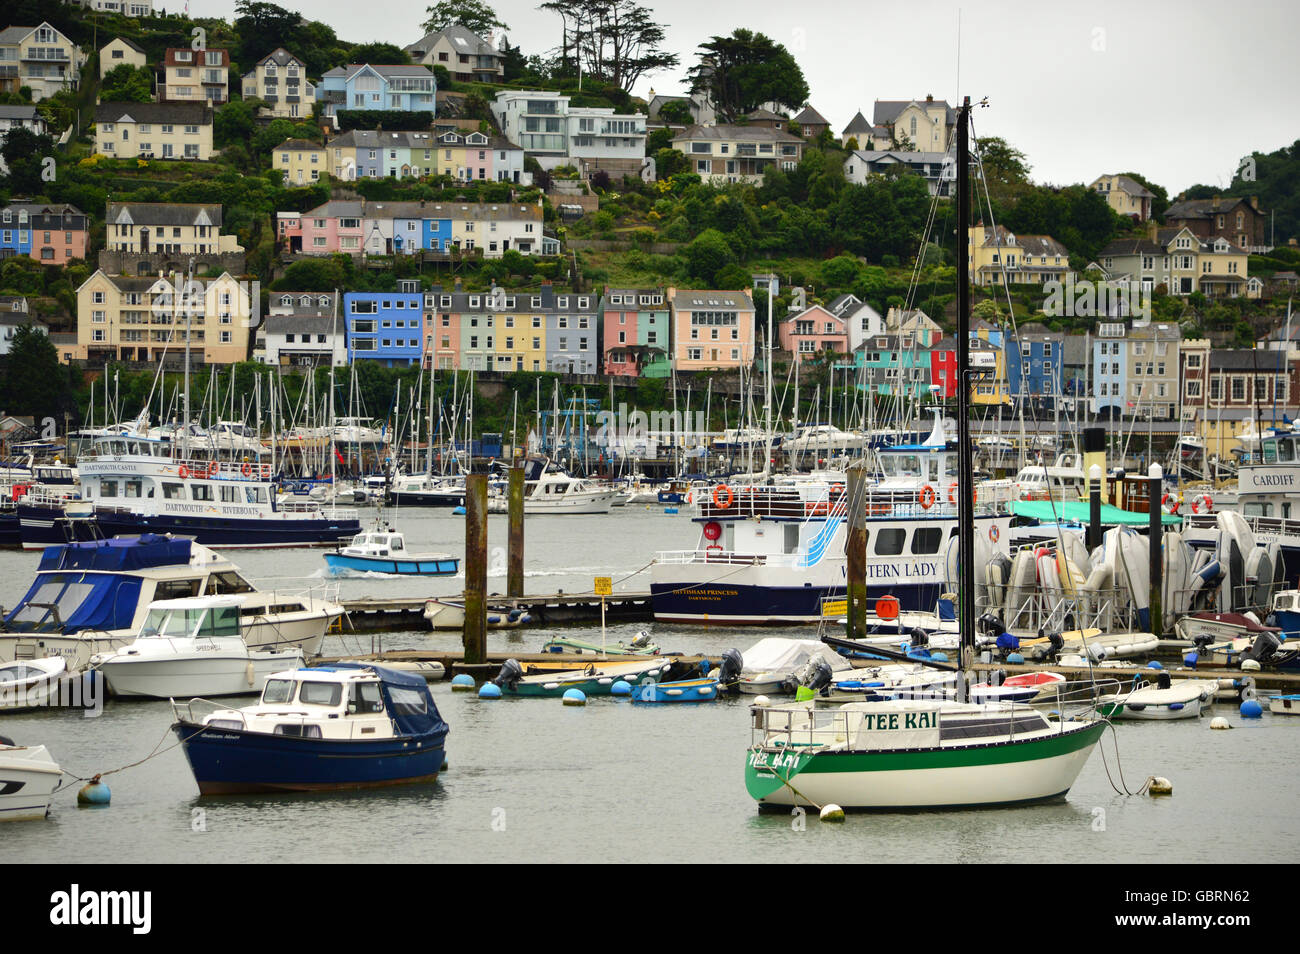 Colourful Kingswear from Dartmouth, across the River Dart, Devon, England Stock Photo